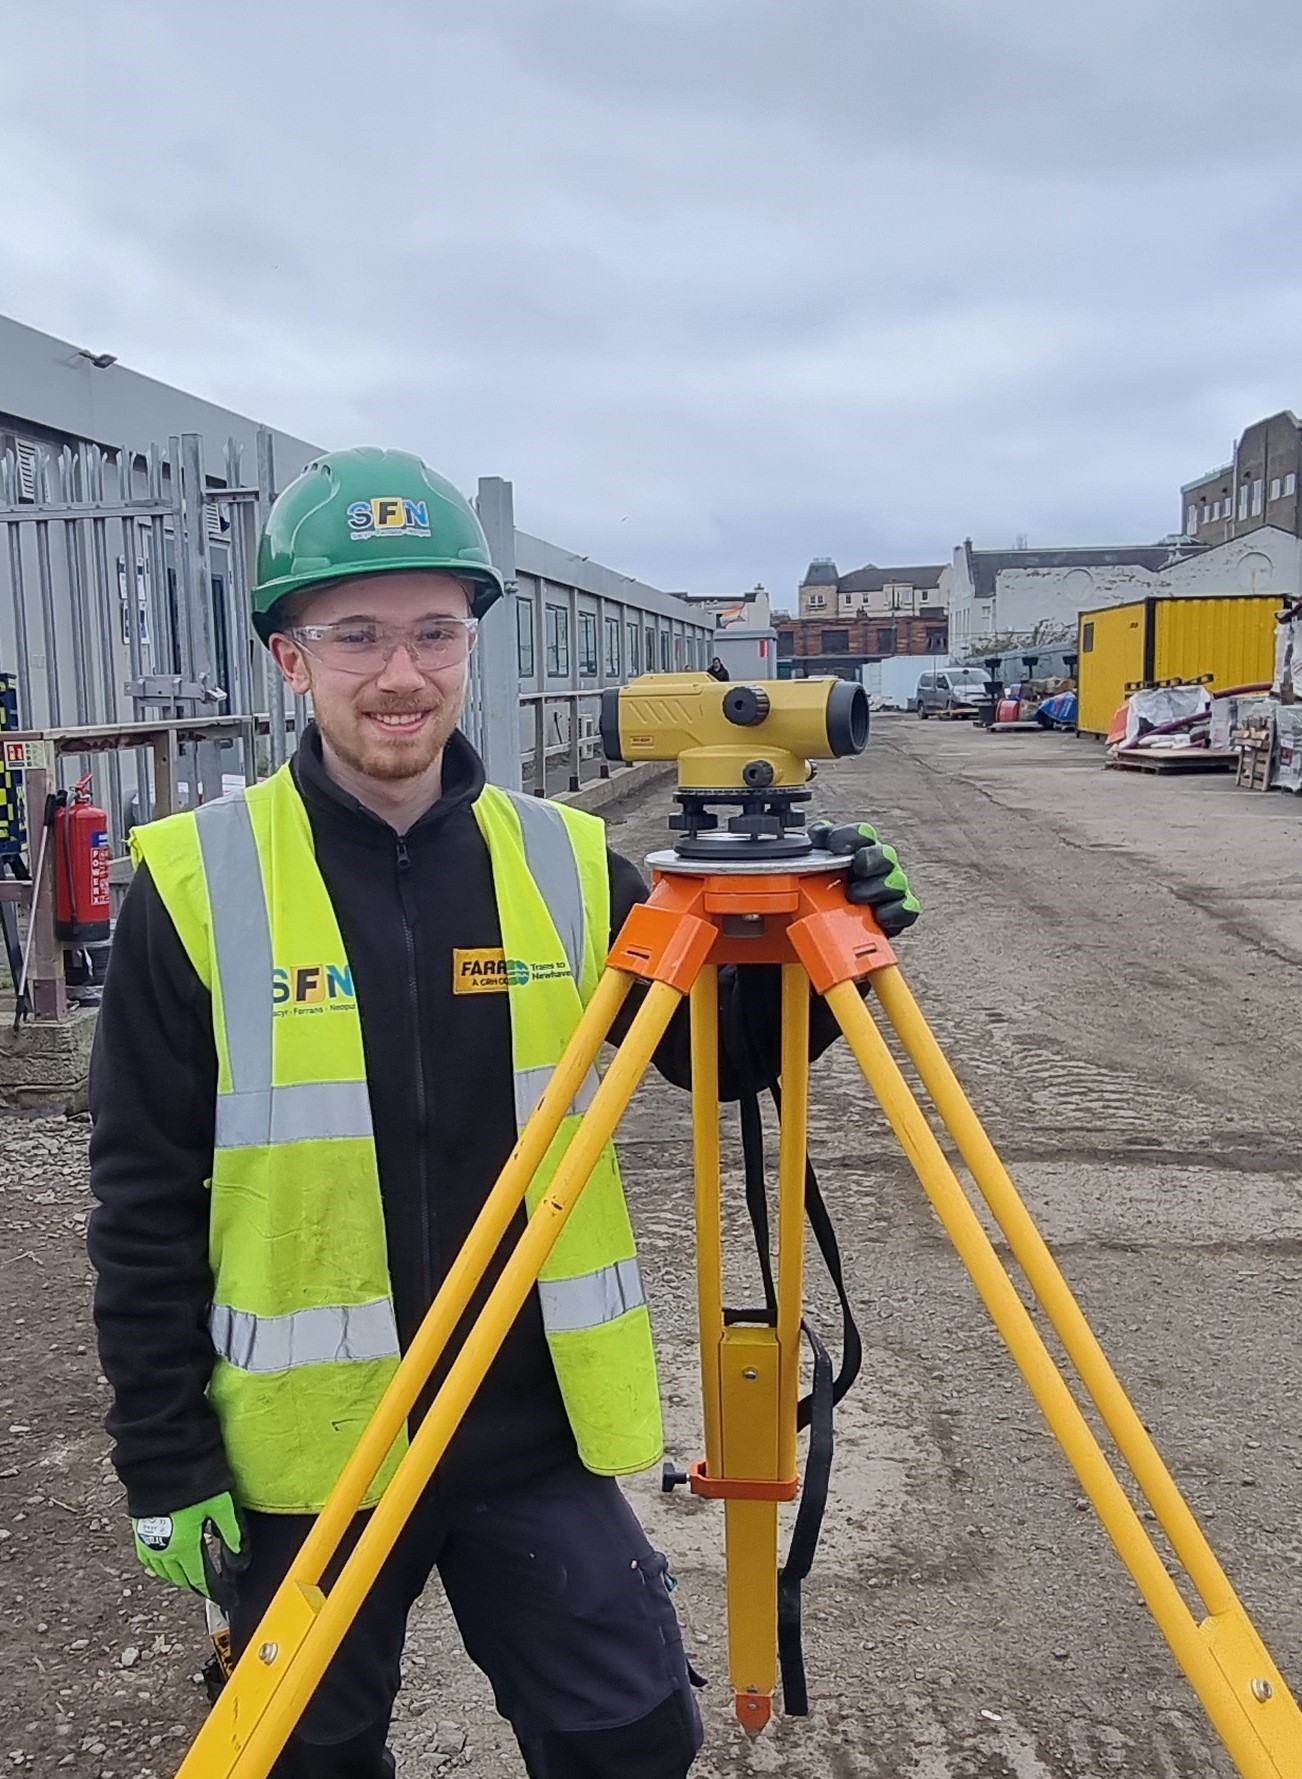 Photo of smiling apprentice in yellow high viz jacket posing on site next to equipment.